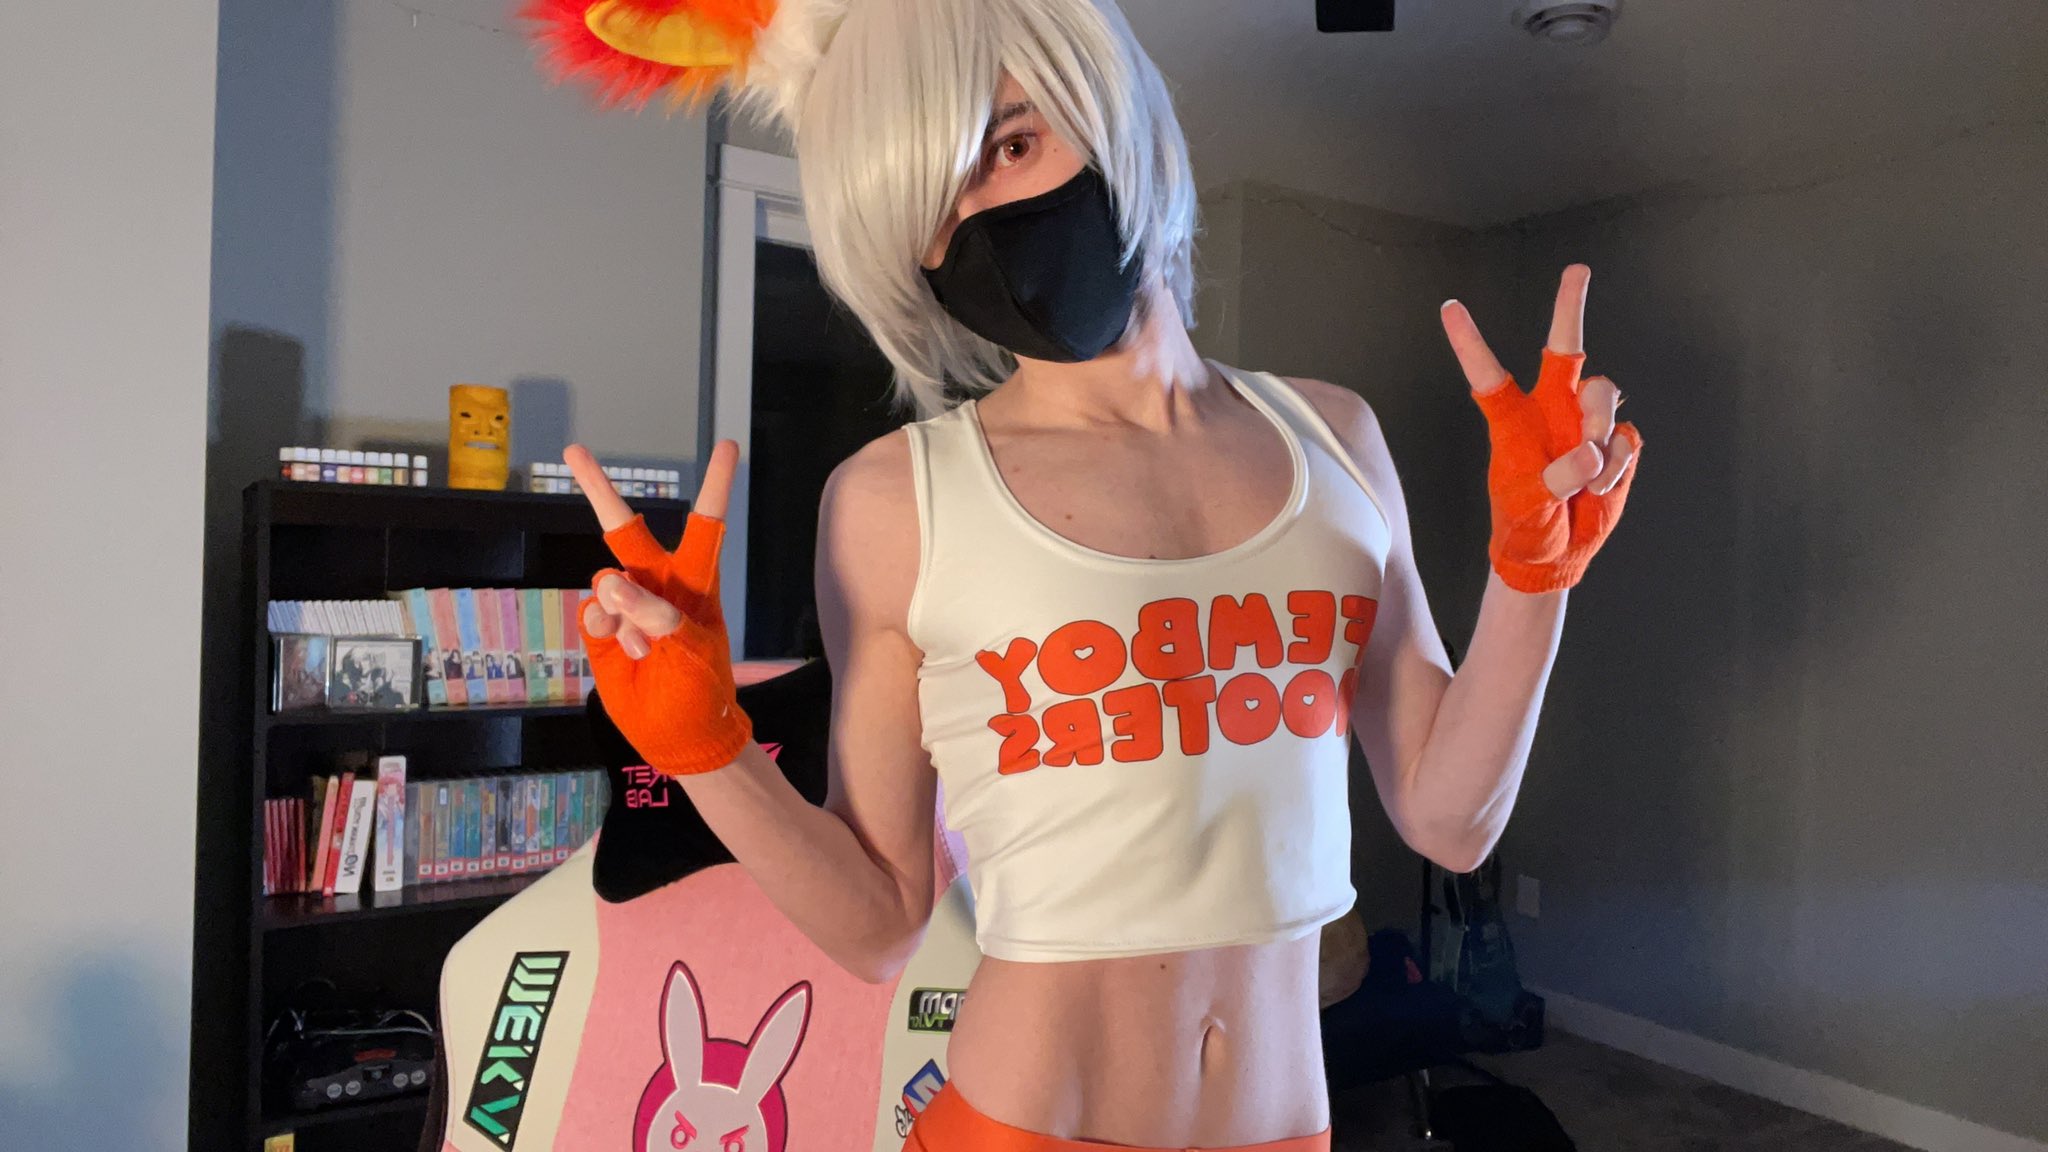 “This is my application to Femboy Hooters! 